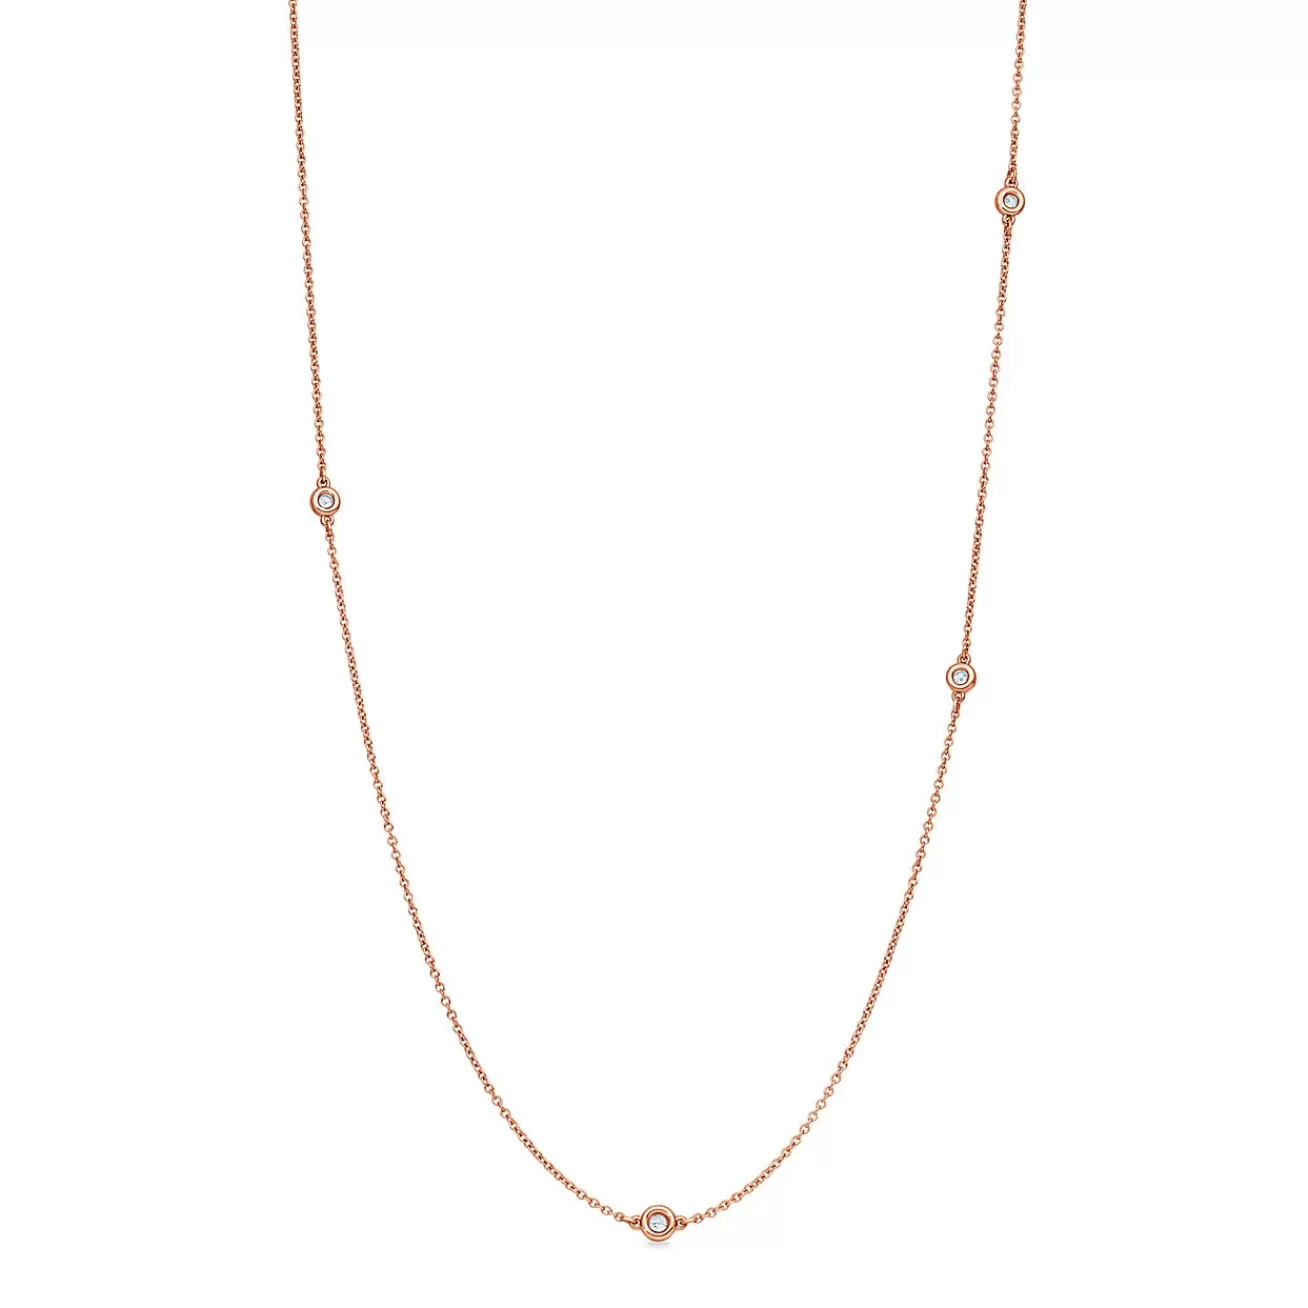 Tiffany & Co. Elsa Peretti® Diamonds by the Yard® sprinkle necklace in 18k rose gold. | ^ Necklaces & Pendants | Rose Gold Jewelry